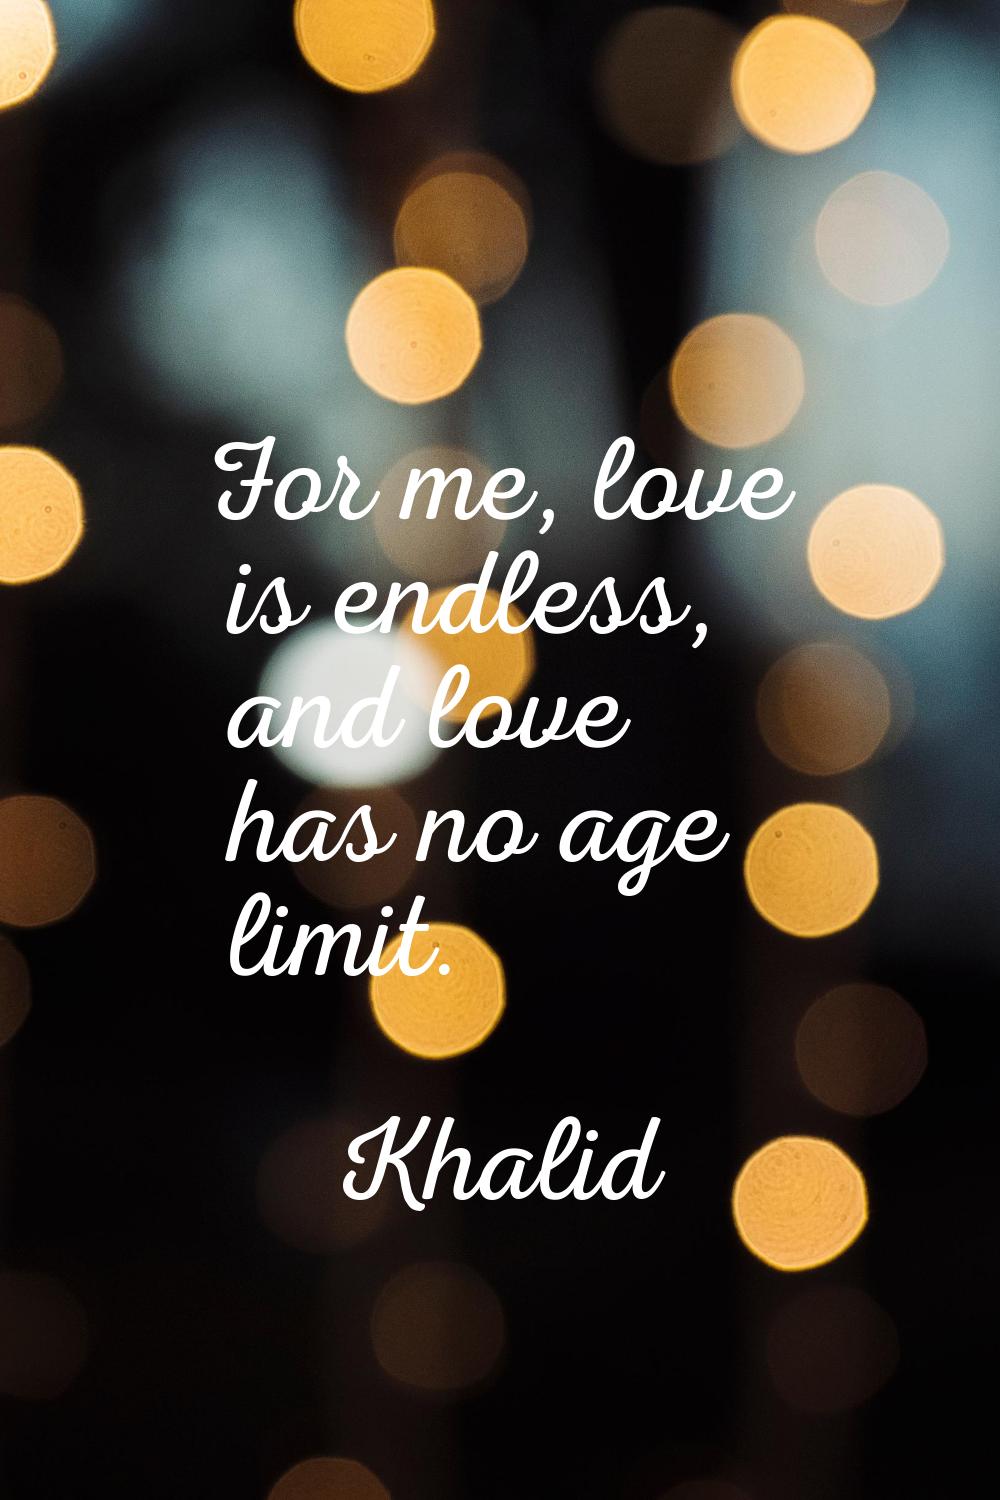 For me, love is endless, and love has no age limit.